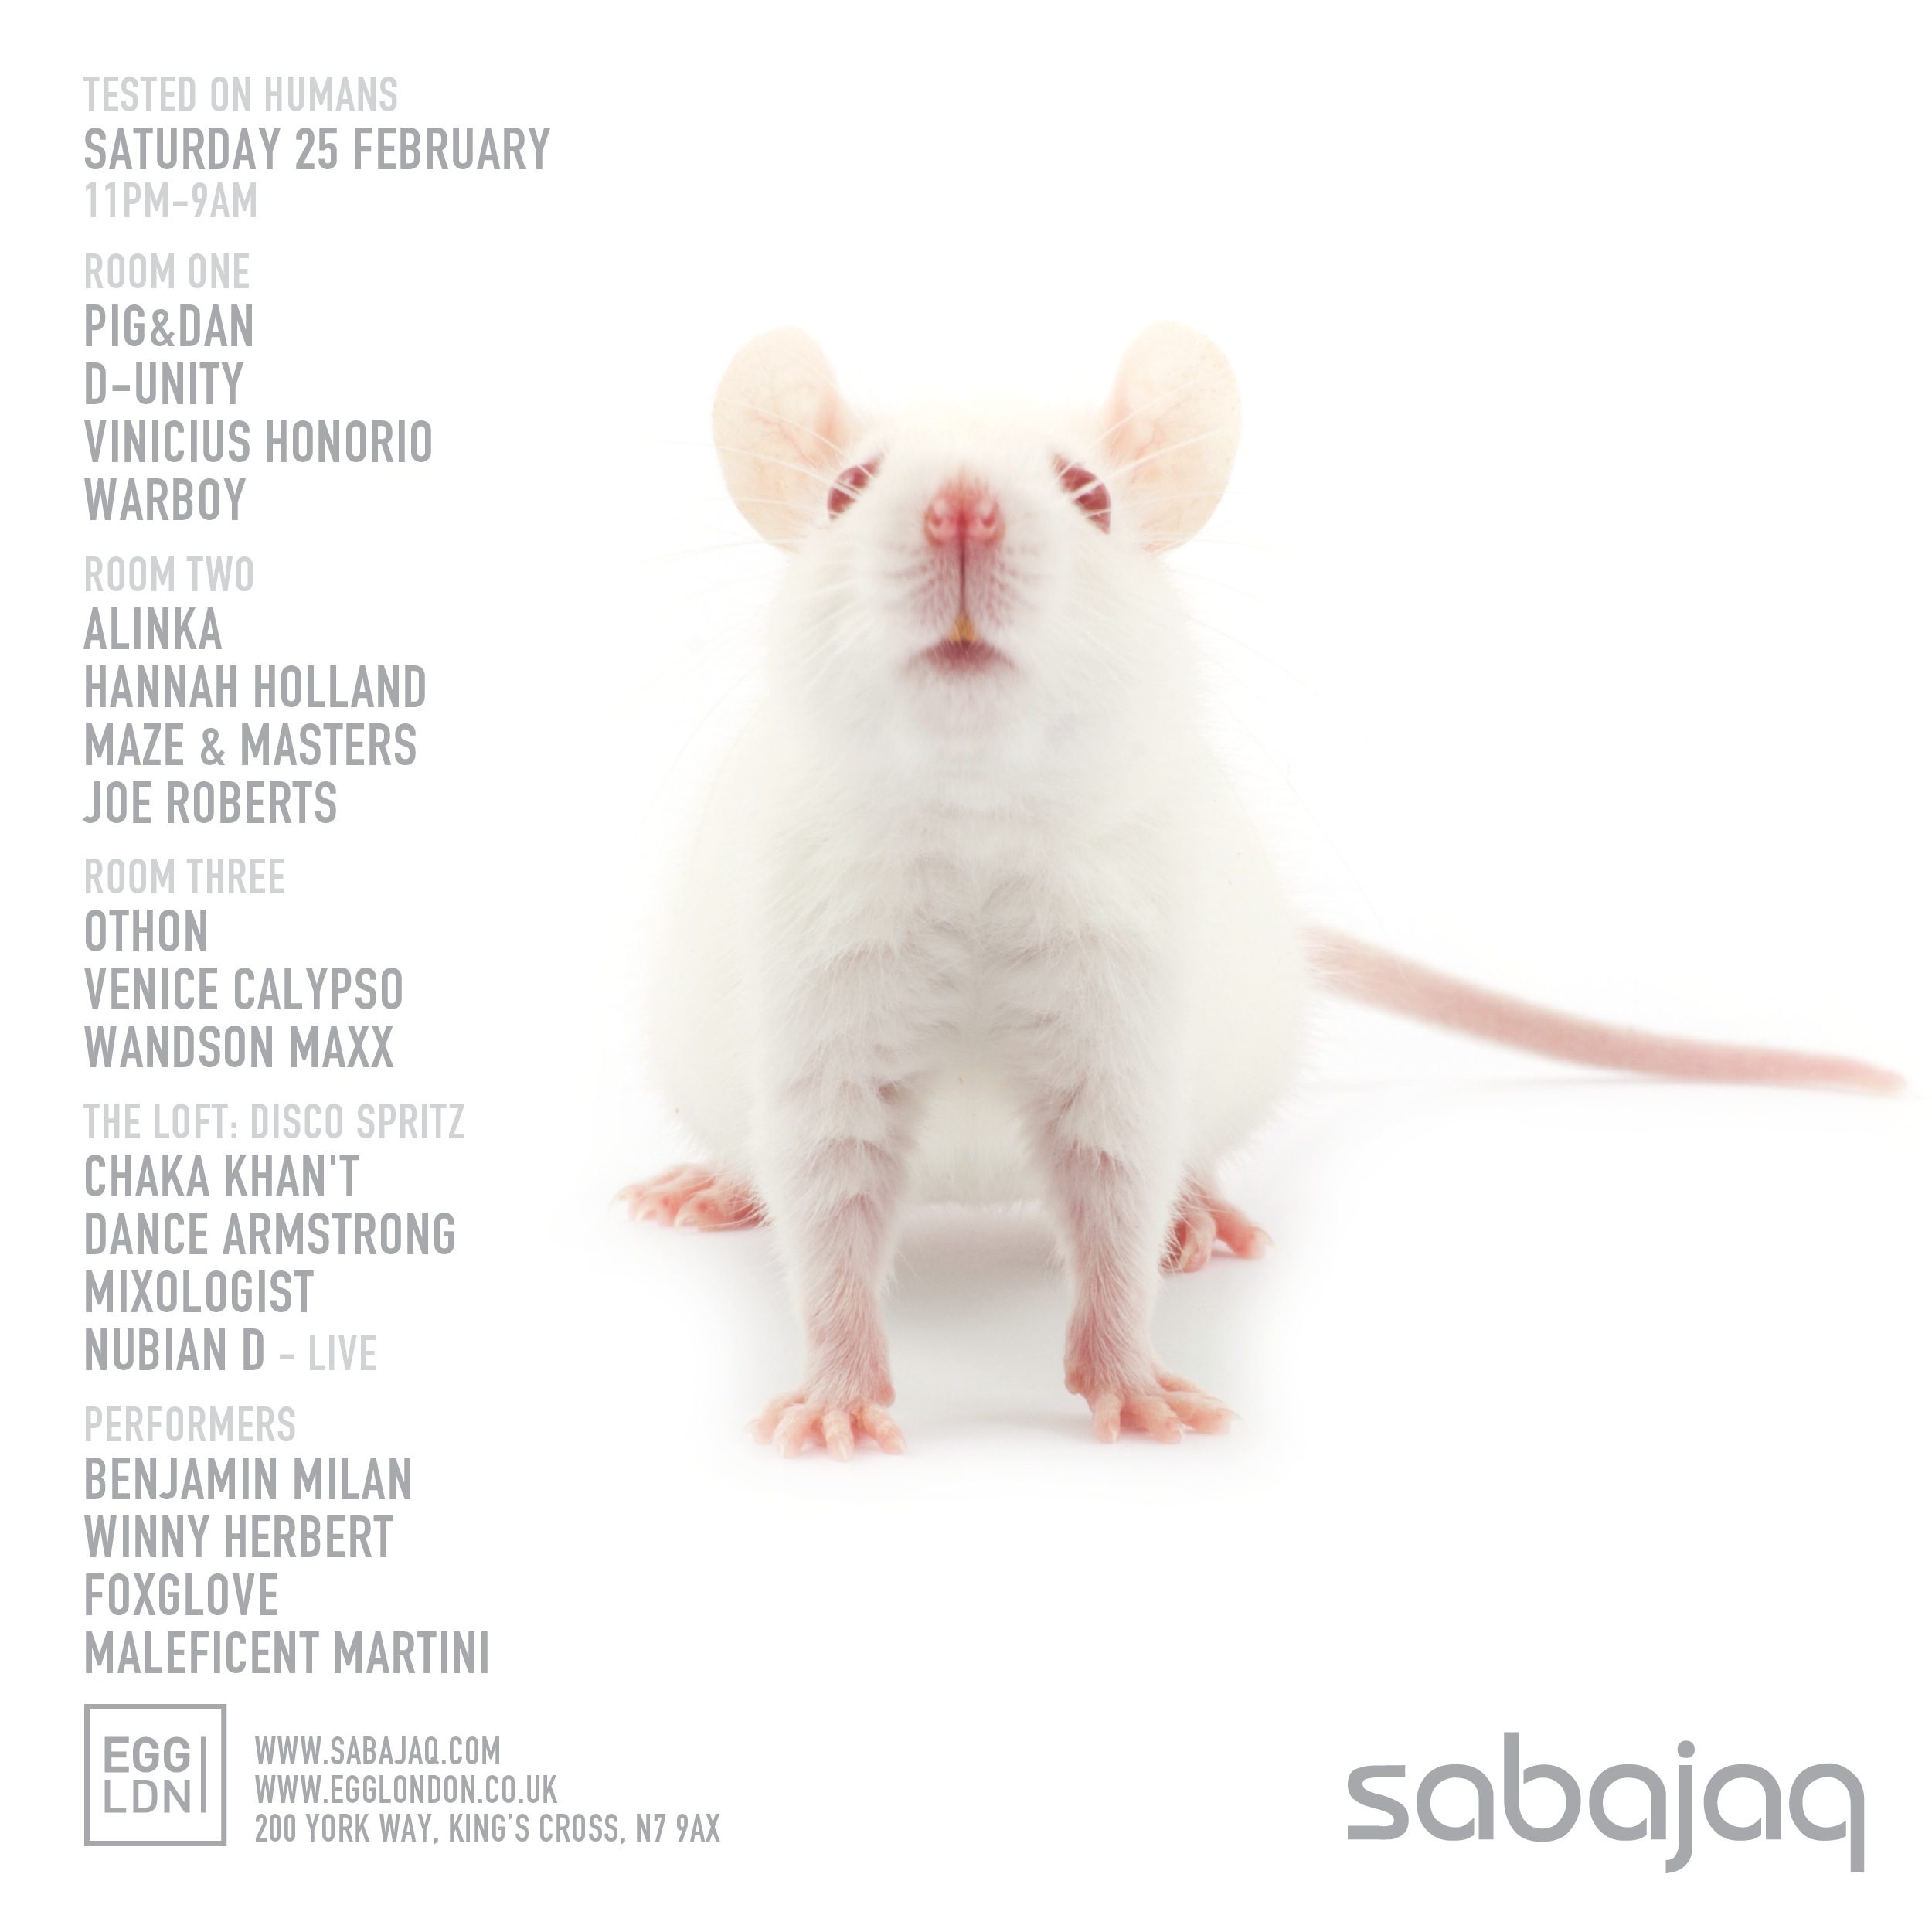 Back to The Egg for Sabajaq with Pig & Dan, D-Unity, Othon and others